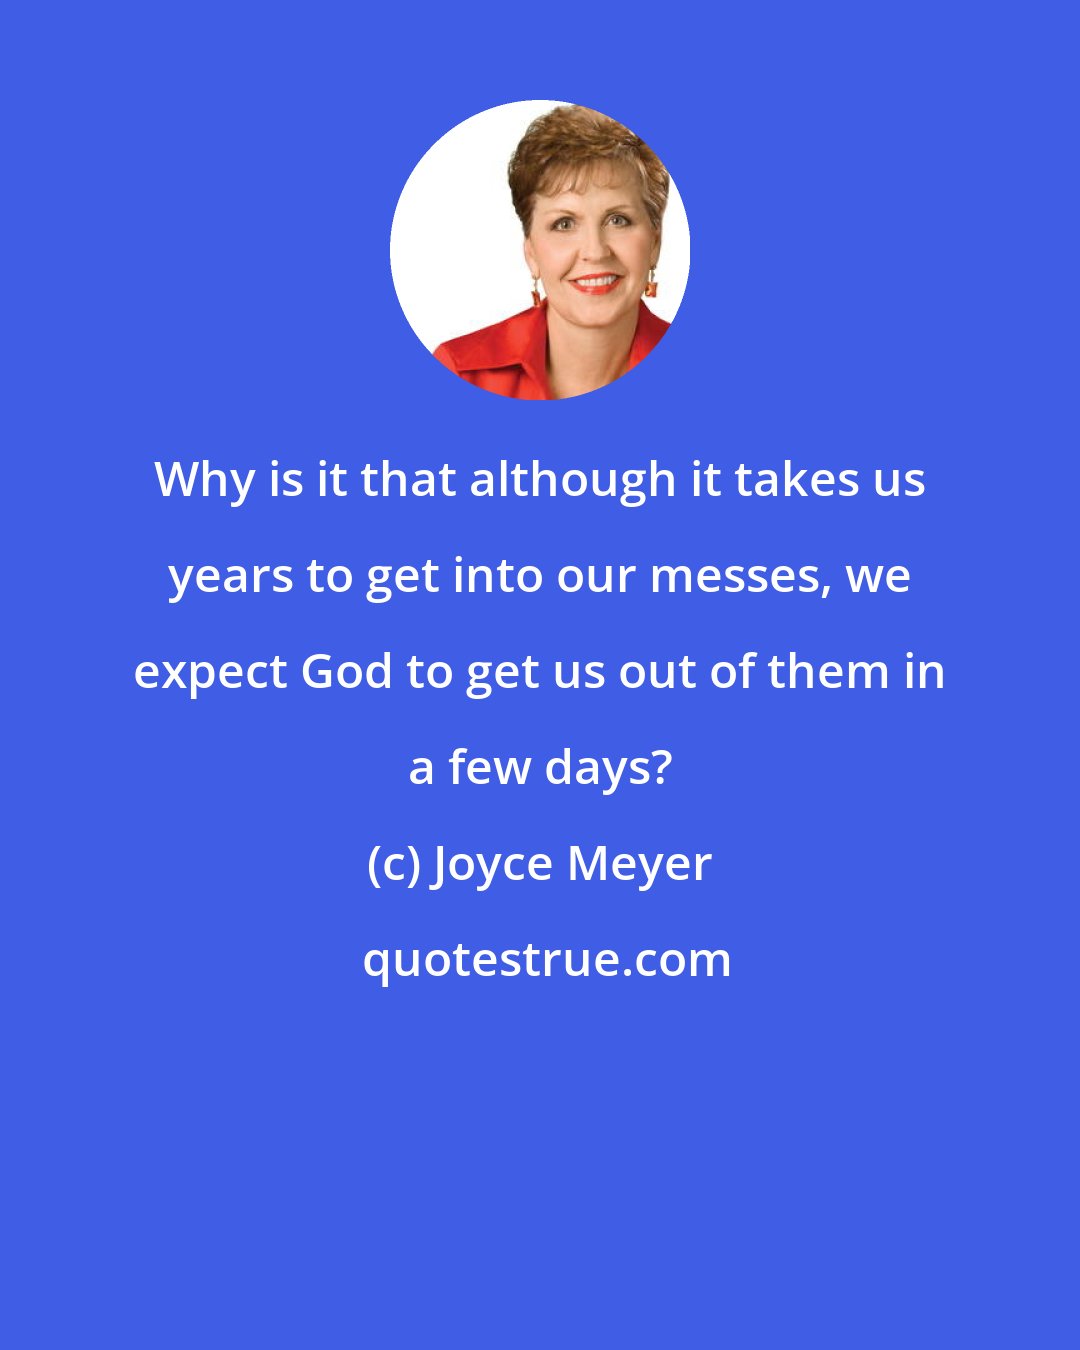 Joyce Meyer: Why is it that although it takes us years to get into our messes, we expect God to get us out of them in a few days?